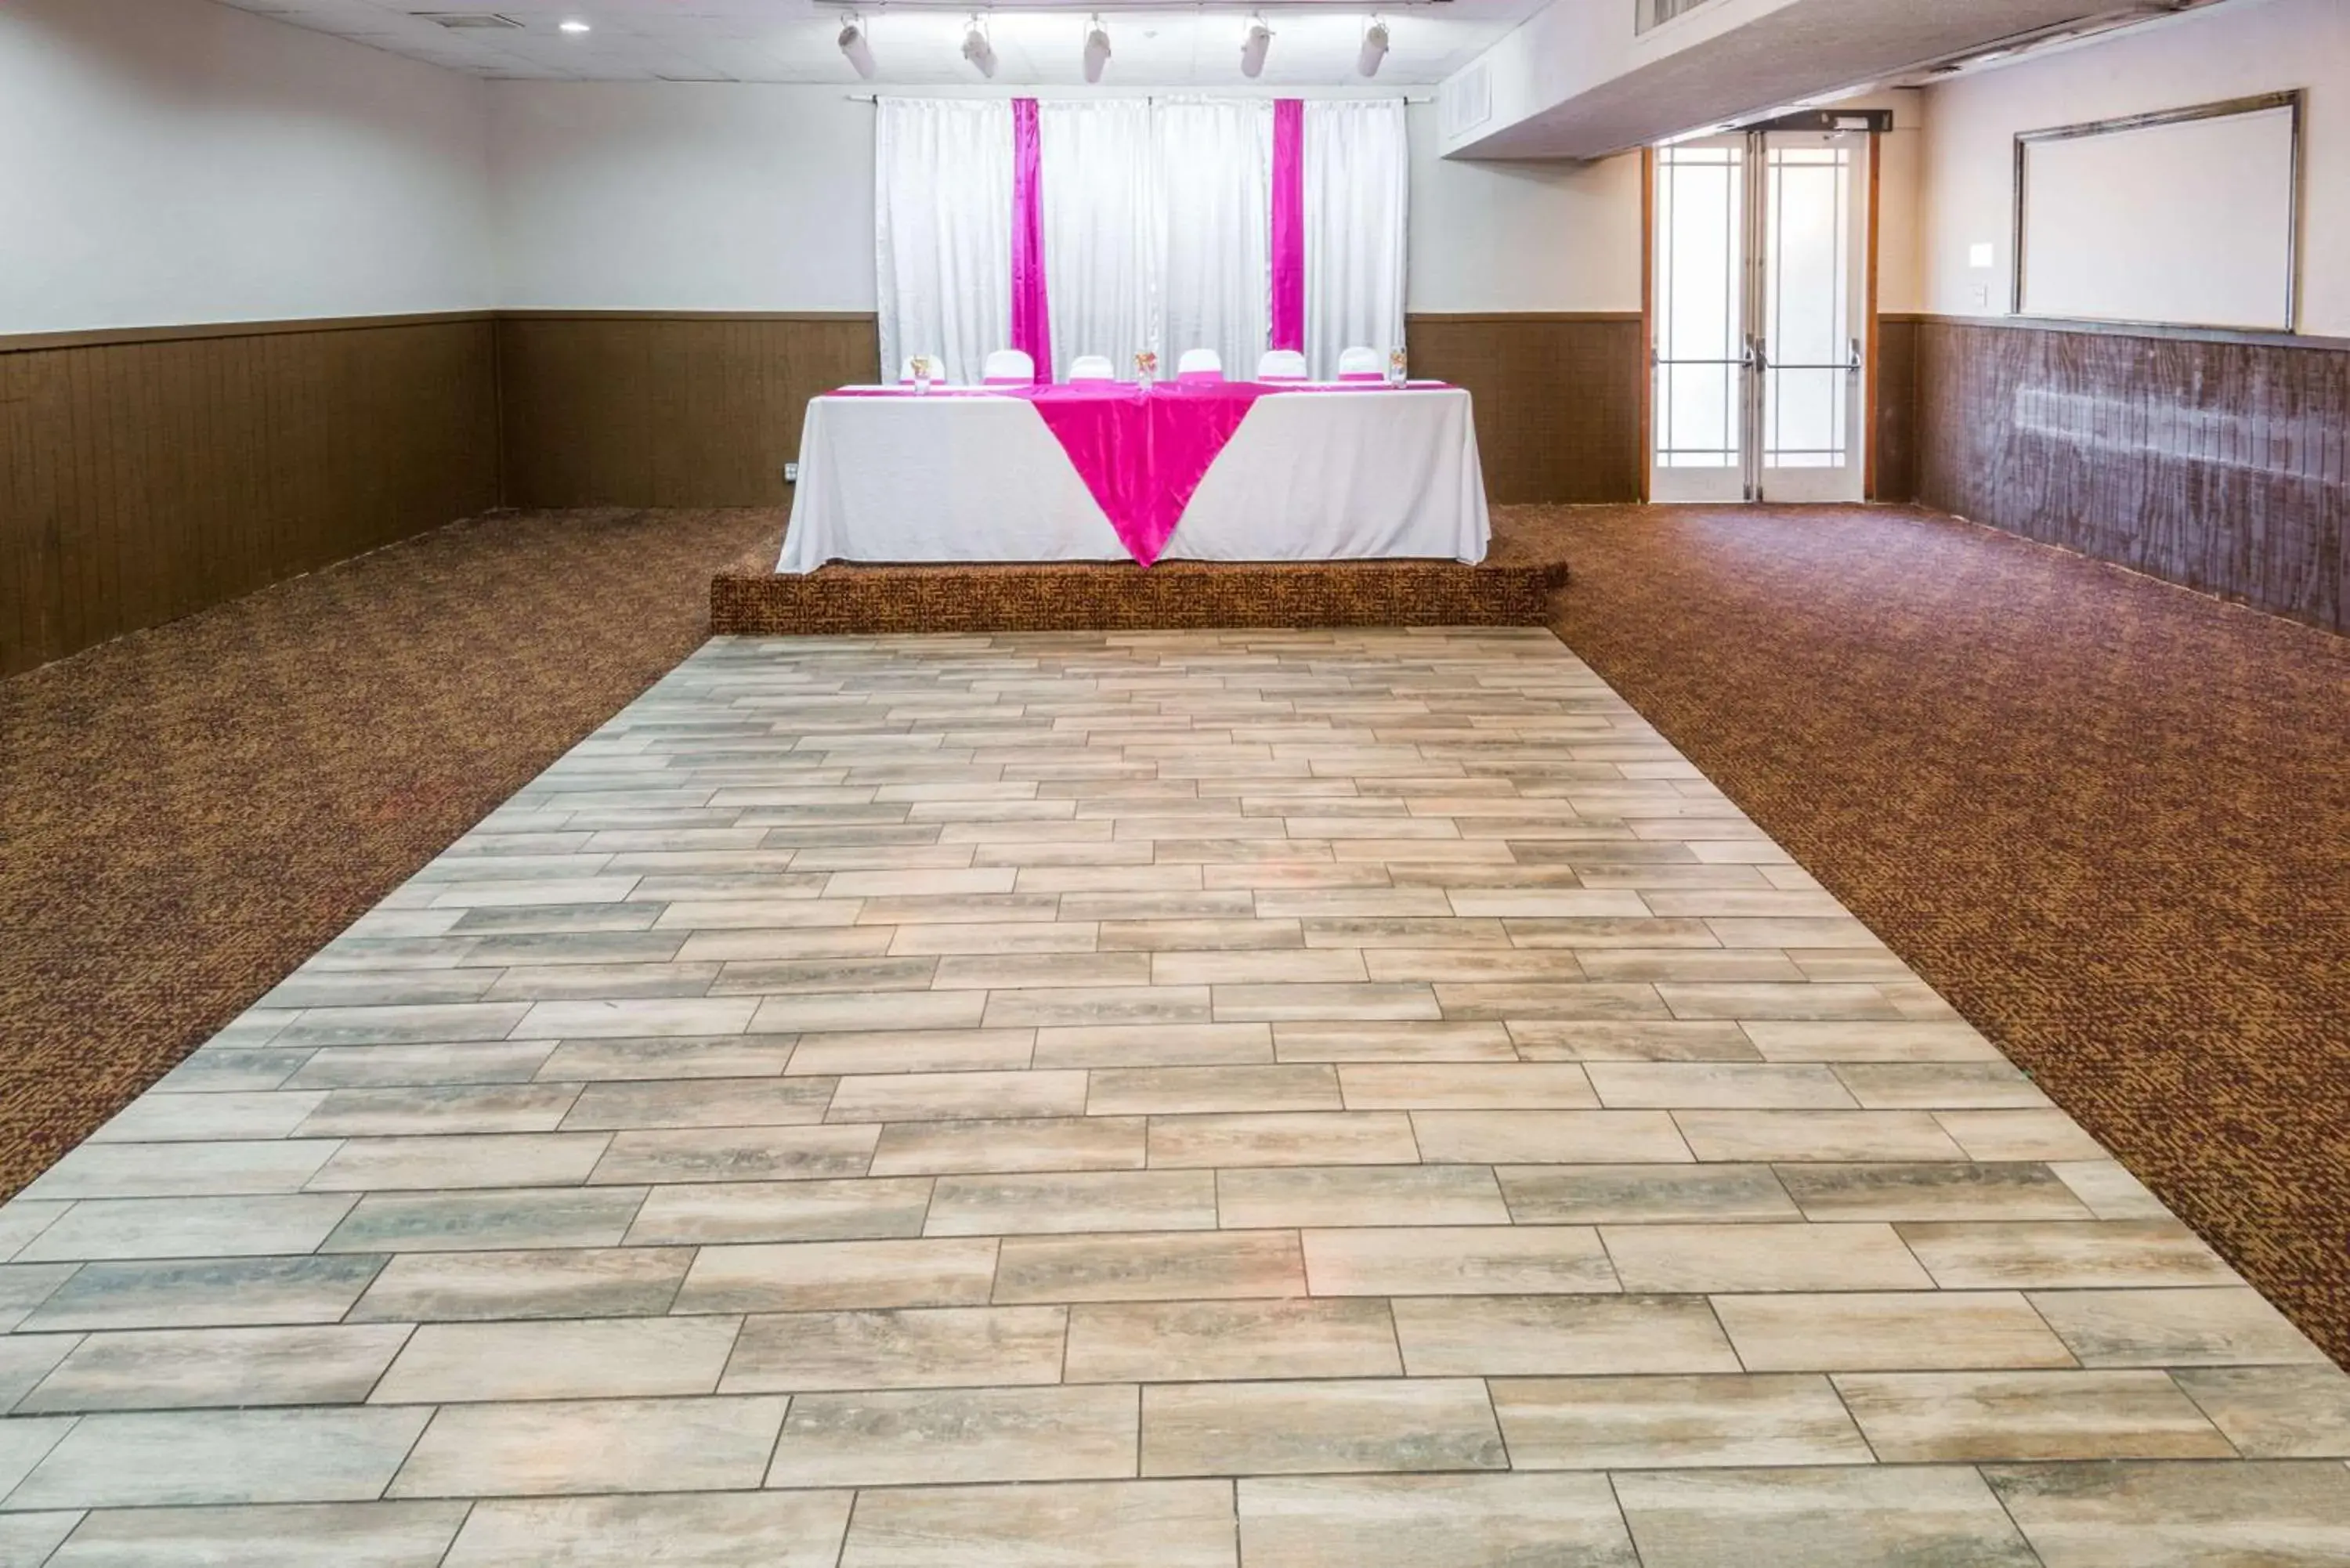 On site, Banquet Facilities in Columbus Grand Hotel & Banquet Center